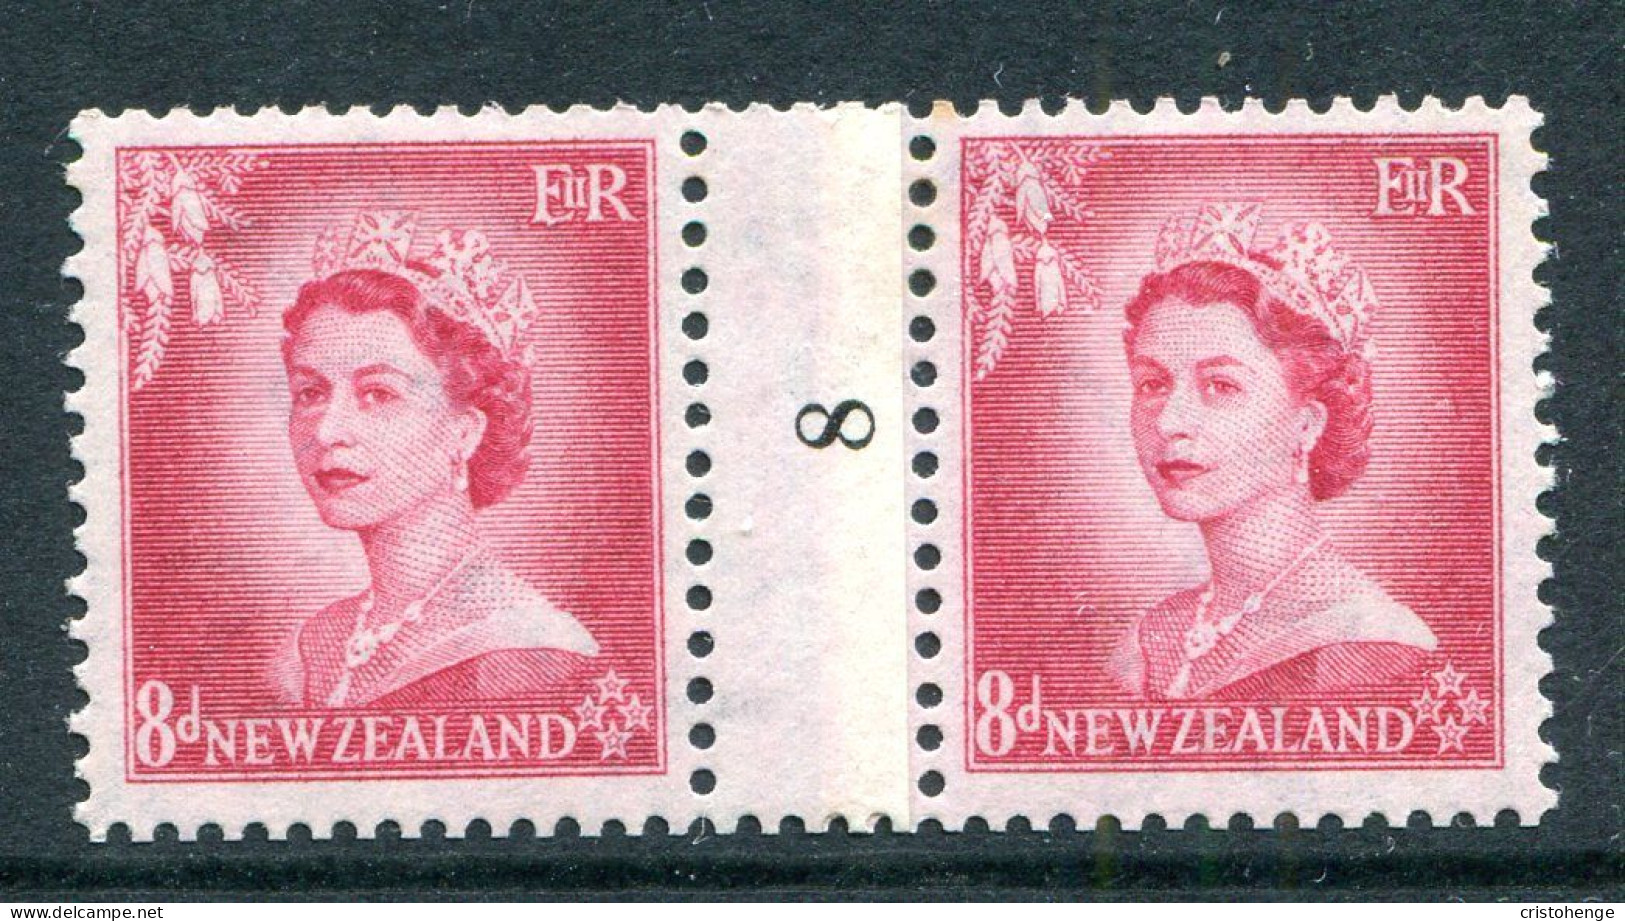 New Zealand 1953-59 QEII Definitives - Coil Pairs - 8d Rose-carmine - No. 8 - LHM (SG Unlisted) - Nuevos